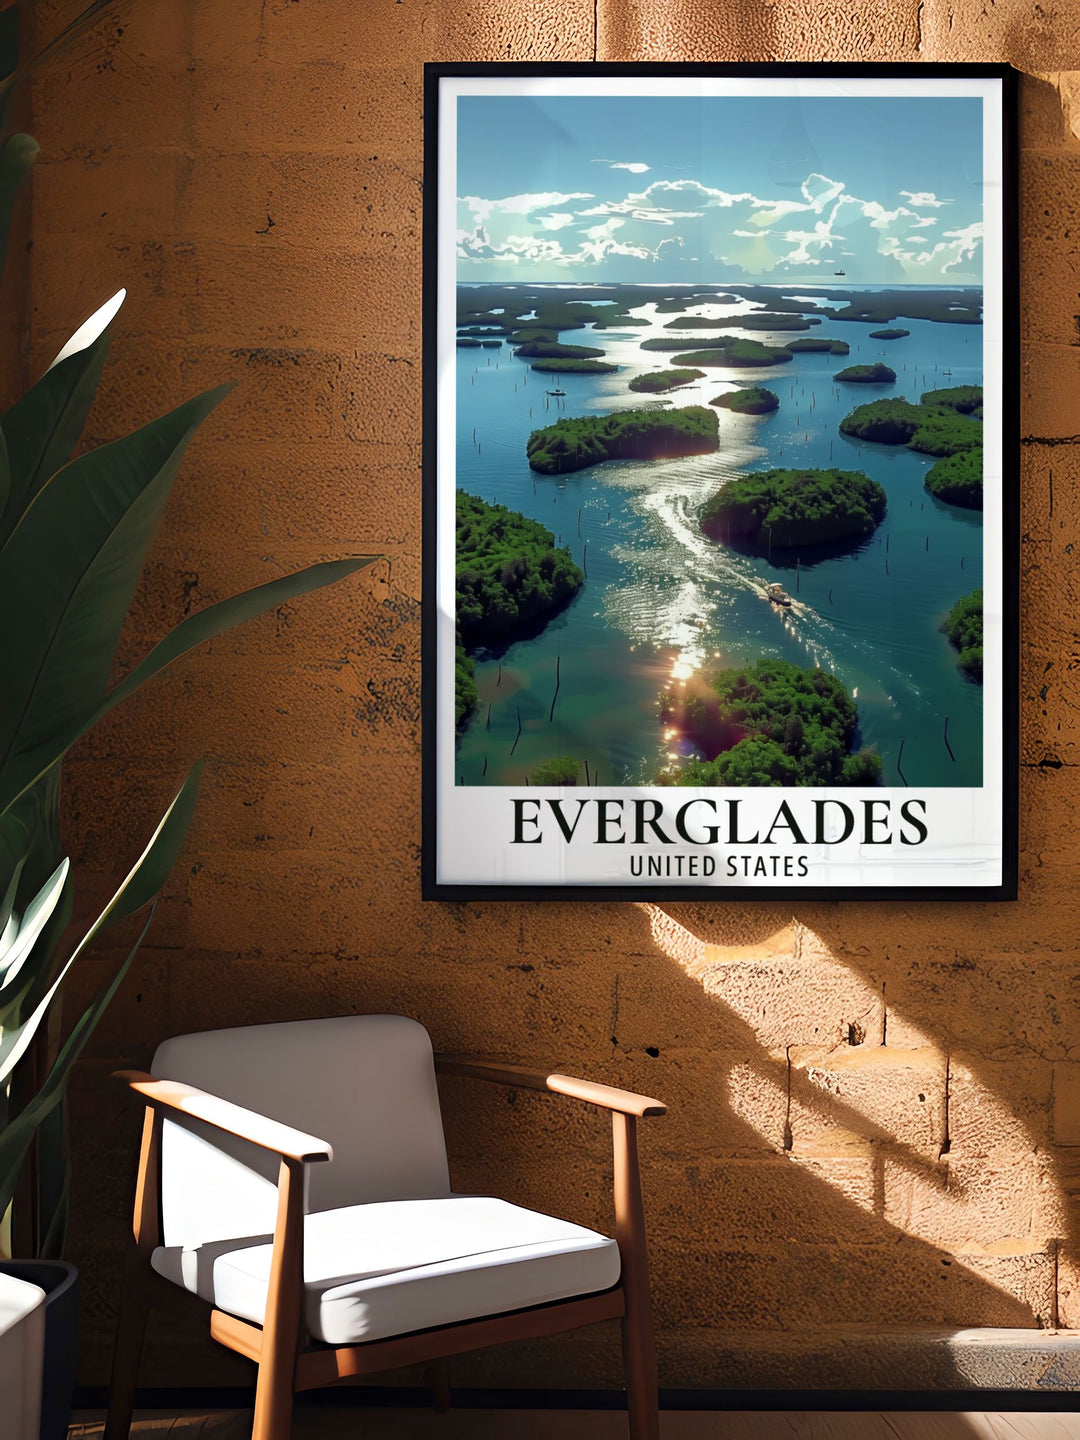 National Park Art featuring the tranquil marshes and vibrant ecosystems of the Everglades. Ideal for home decor and nature lovers. This print includes the serene 10 thousand islands, making it a standout piece.